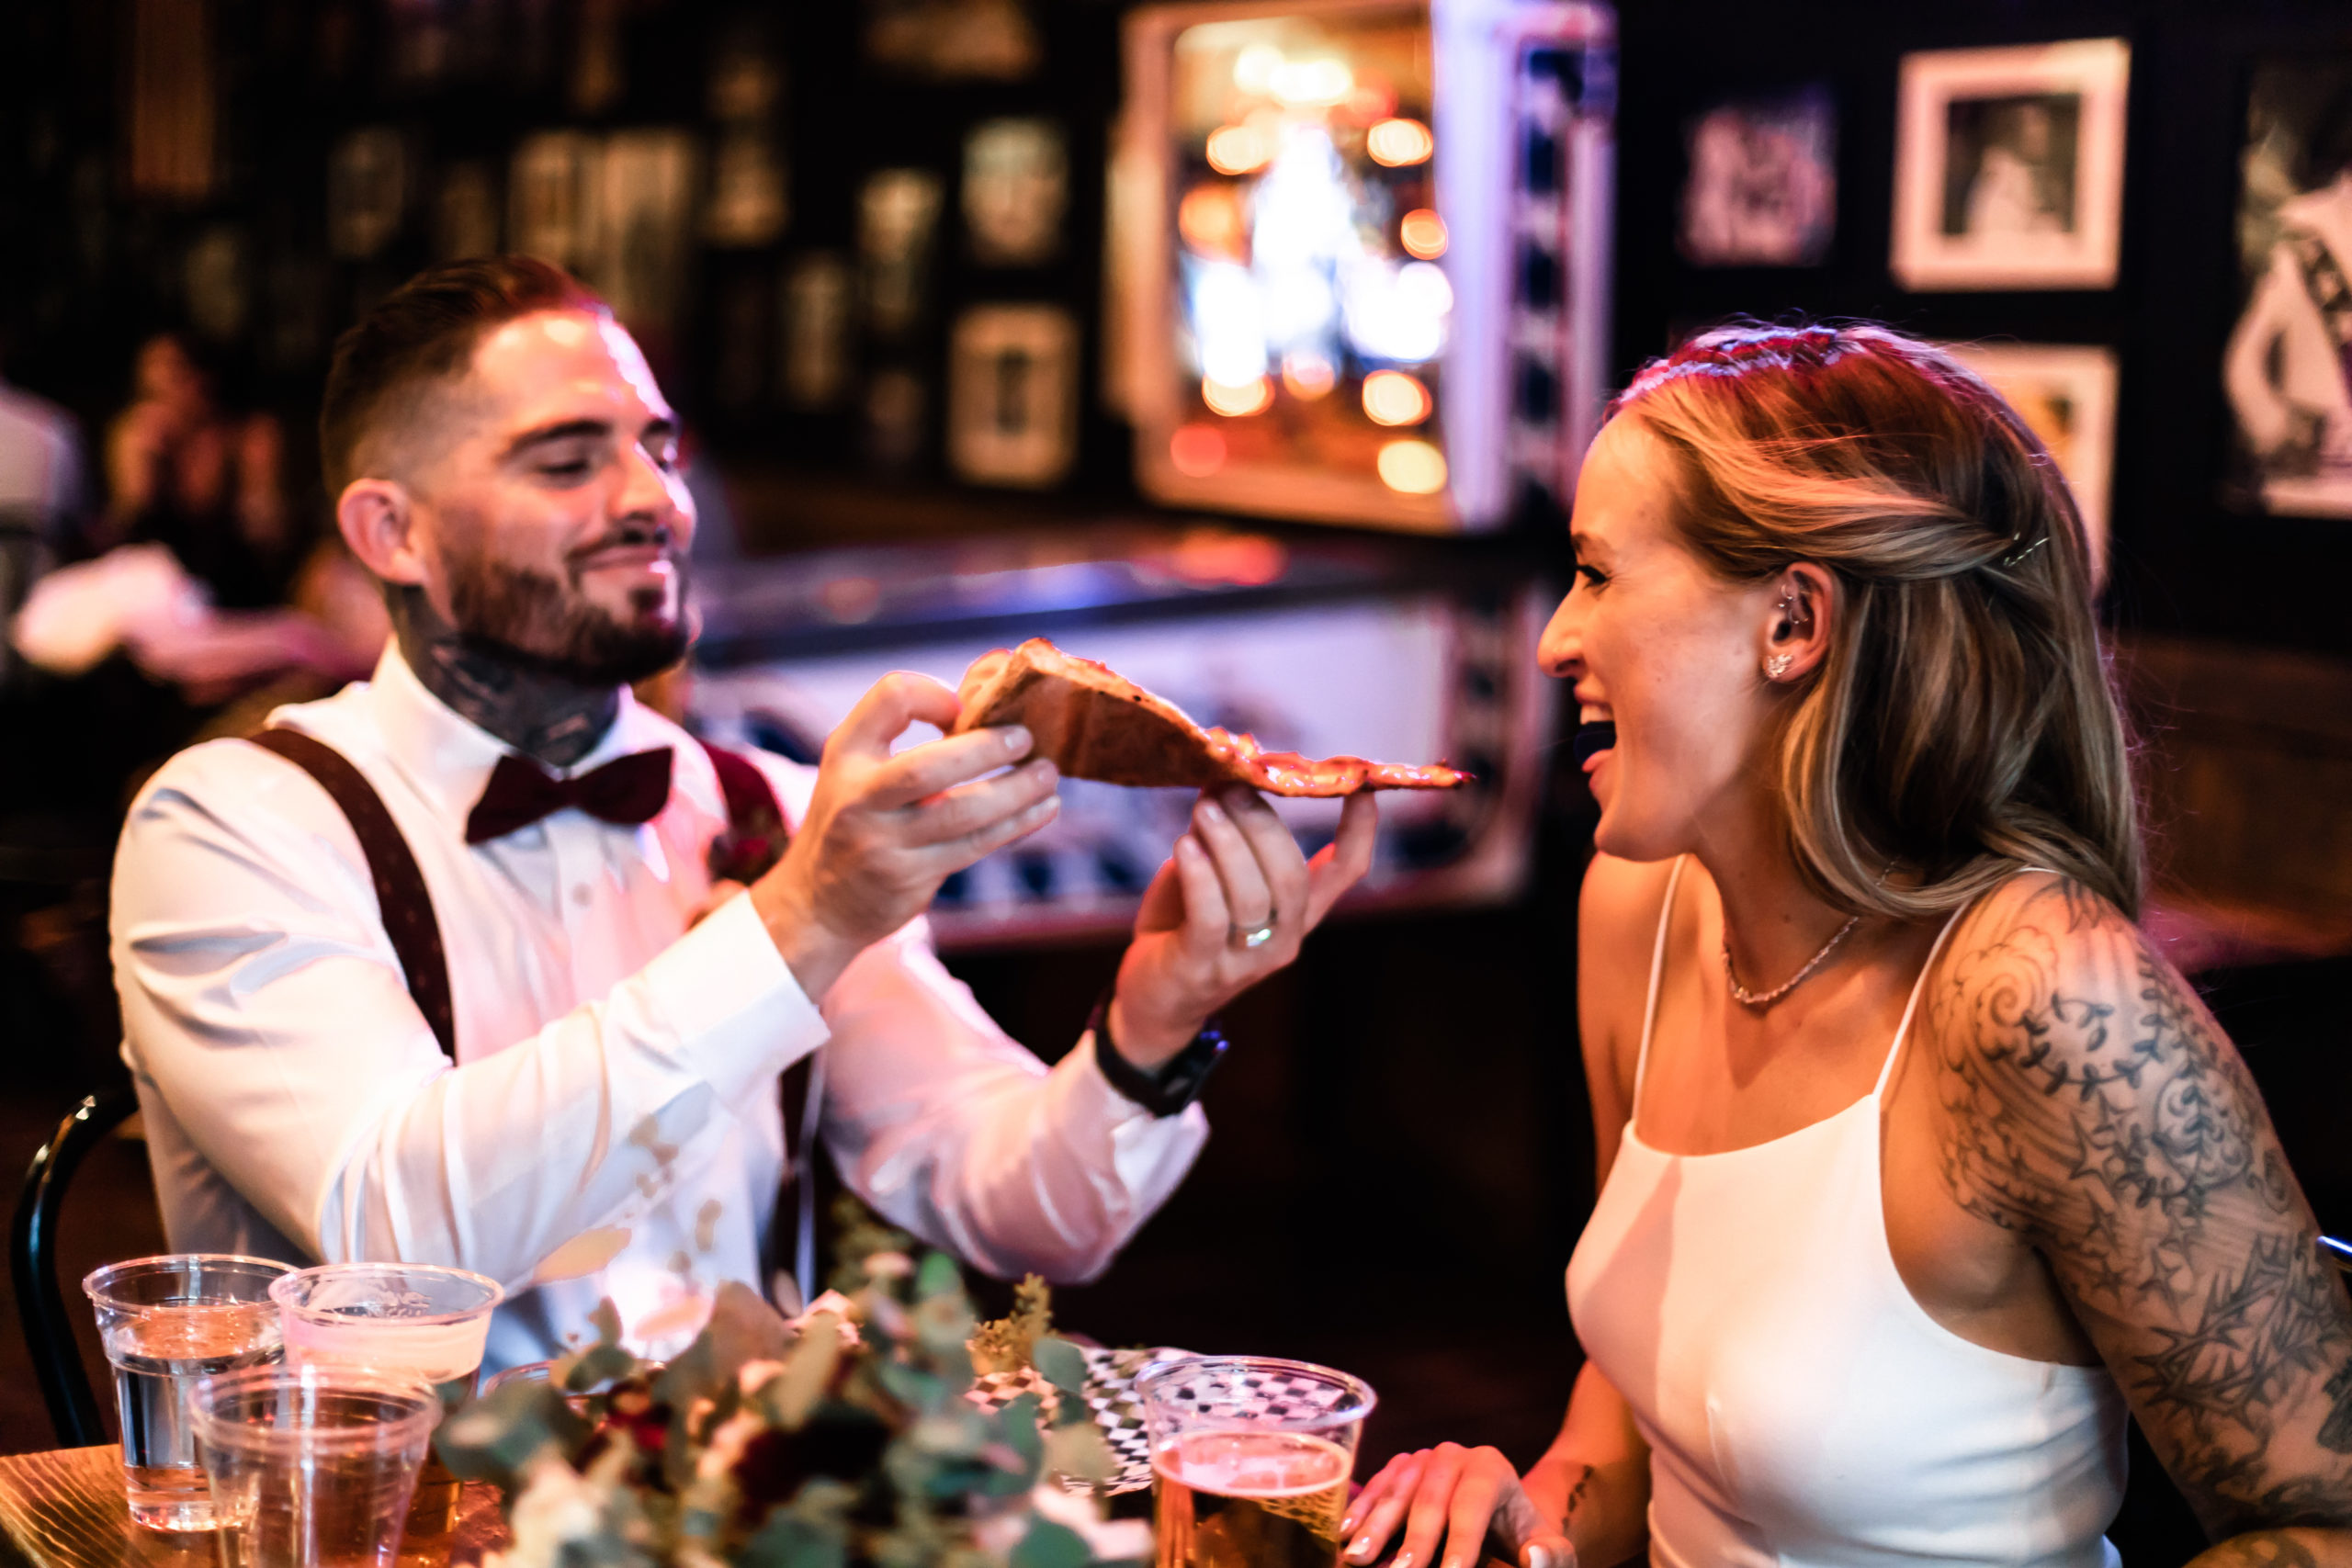 Groom smiles as he feeds a slice of pizza to his bride during their lavish dinner after their Las Vegas elopement